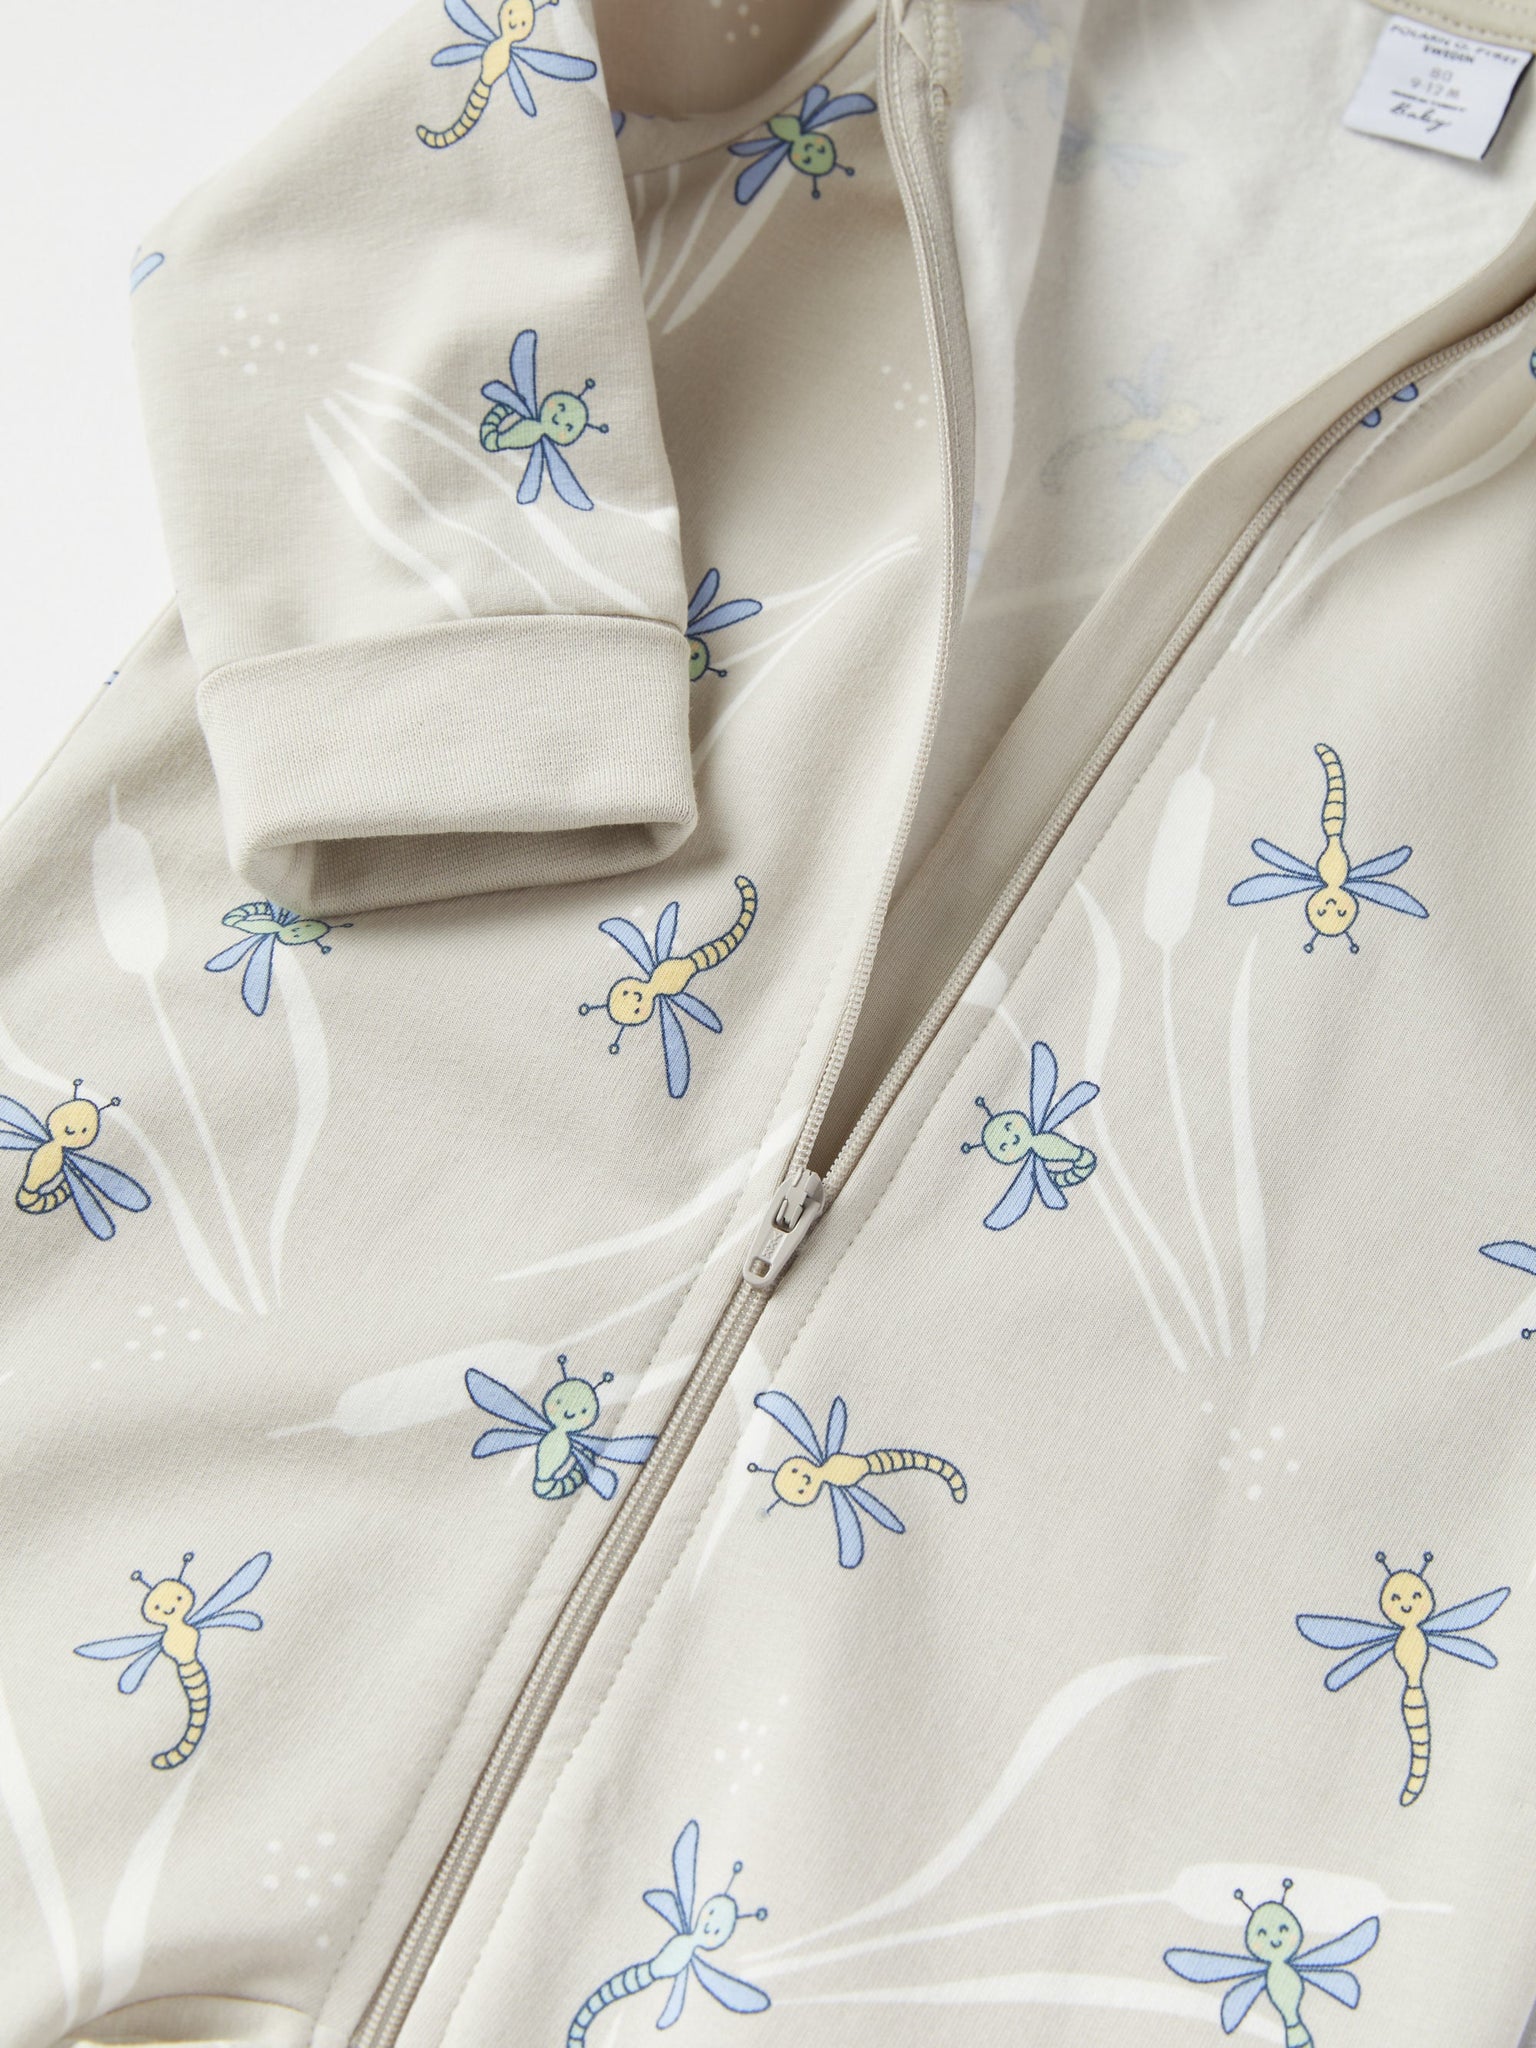 Dragonfly Print Baby All-in-one from the Polarn O. Pyret baby collection. Nordic kids clothes made from sustainable sources.